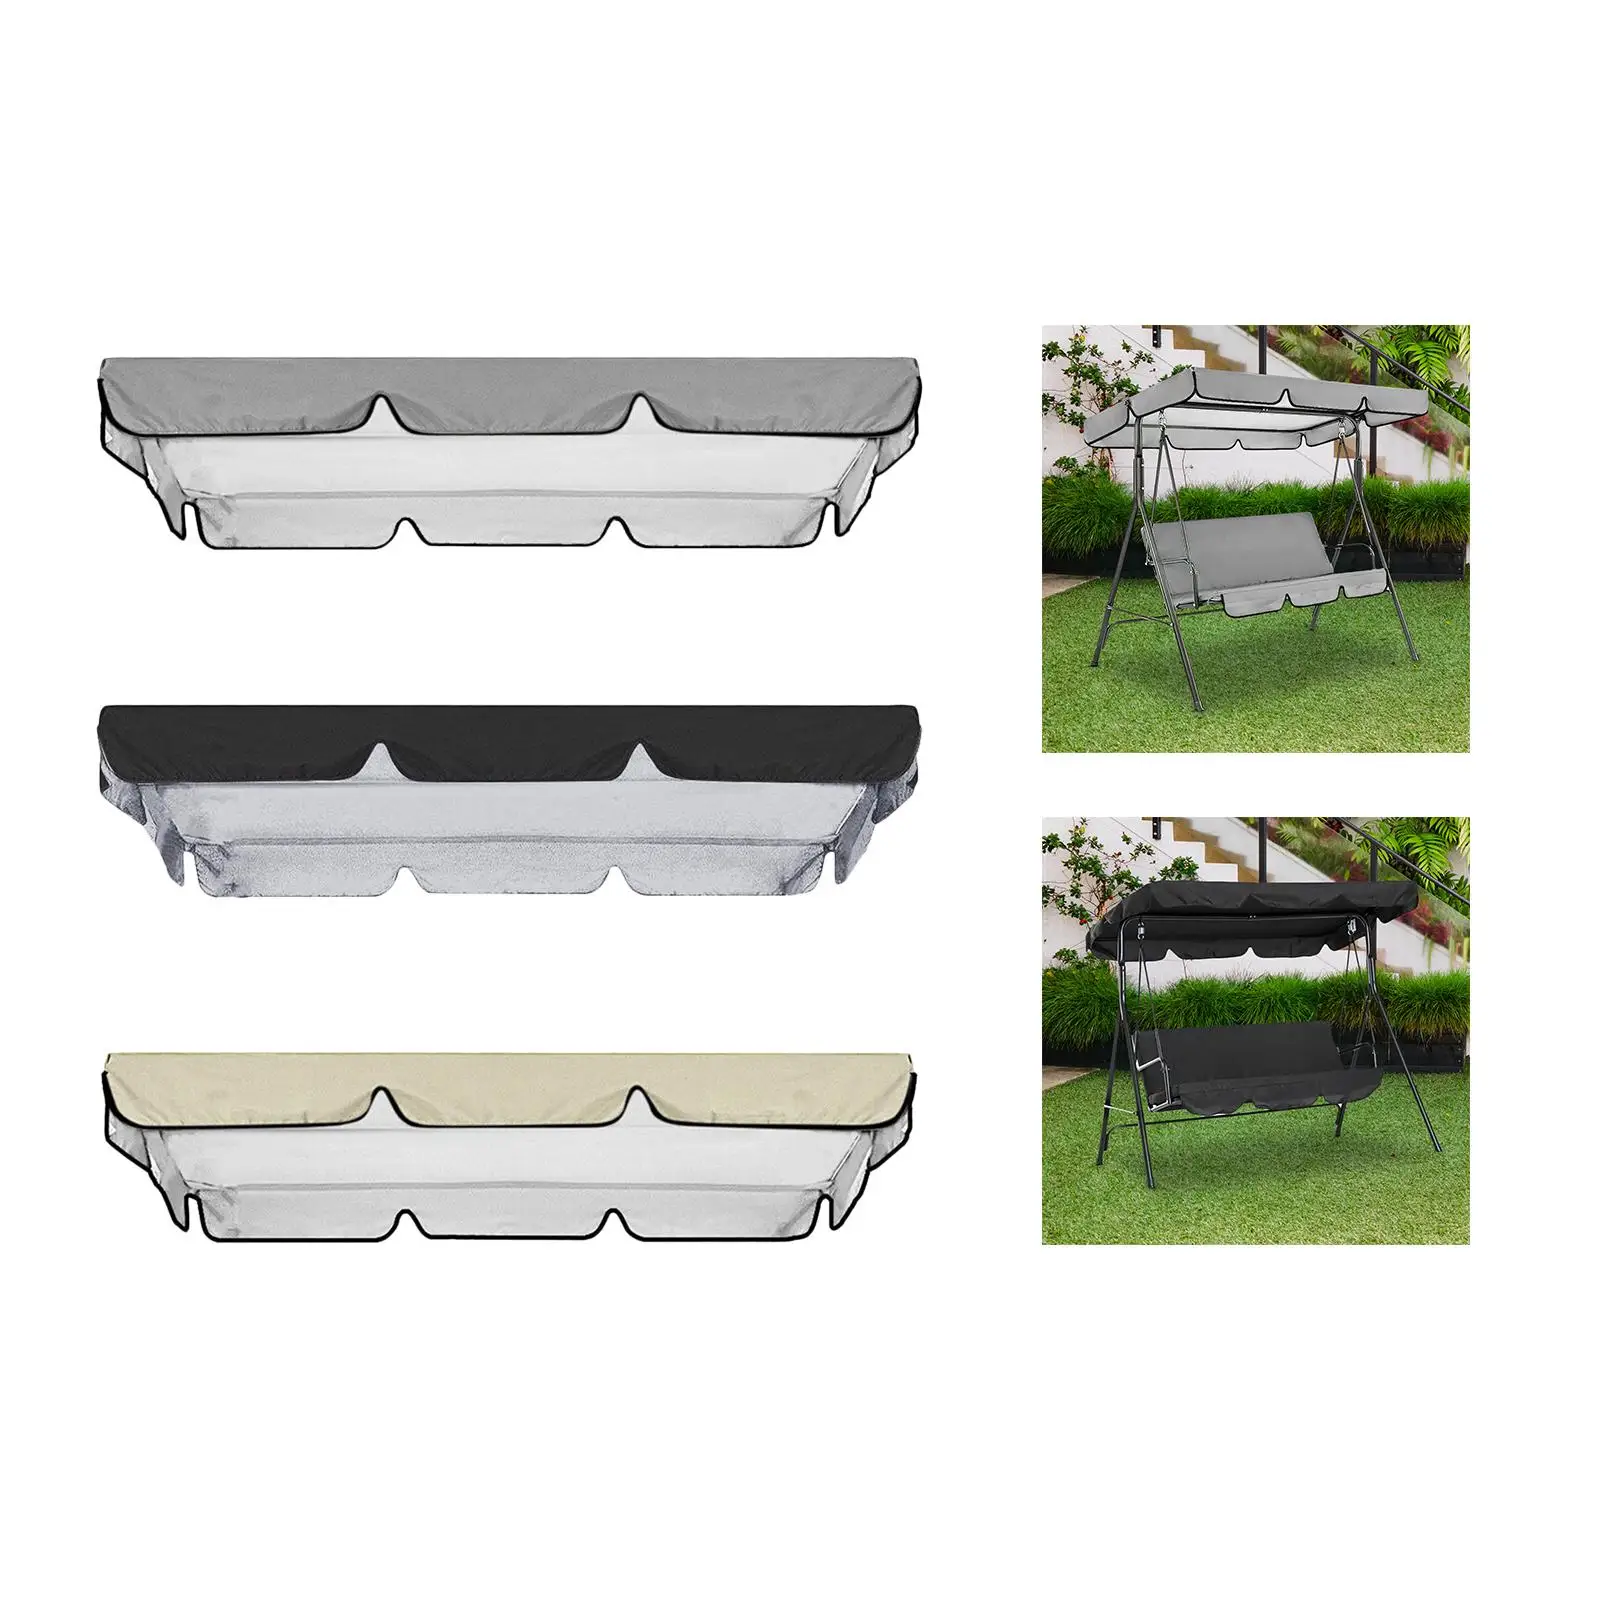 Swing Canopy Replacement Cover Easy to Install Sun Shade Oxford Cloth Swing Cover for Outdoor Yard Bench Seat Swing Chair Garden